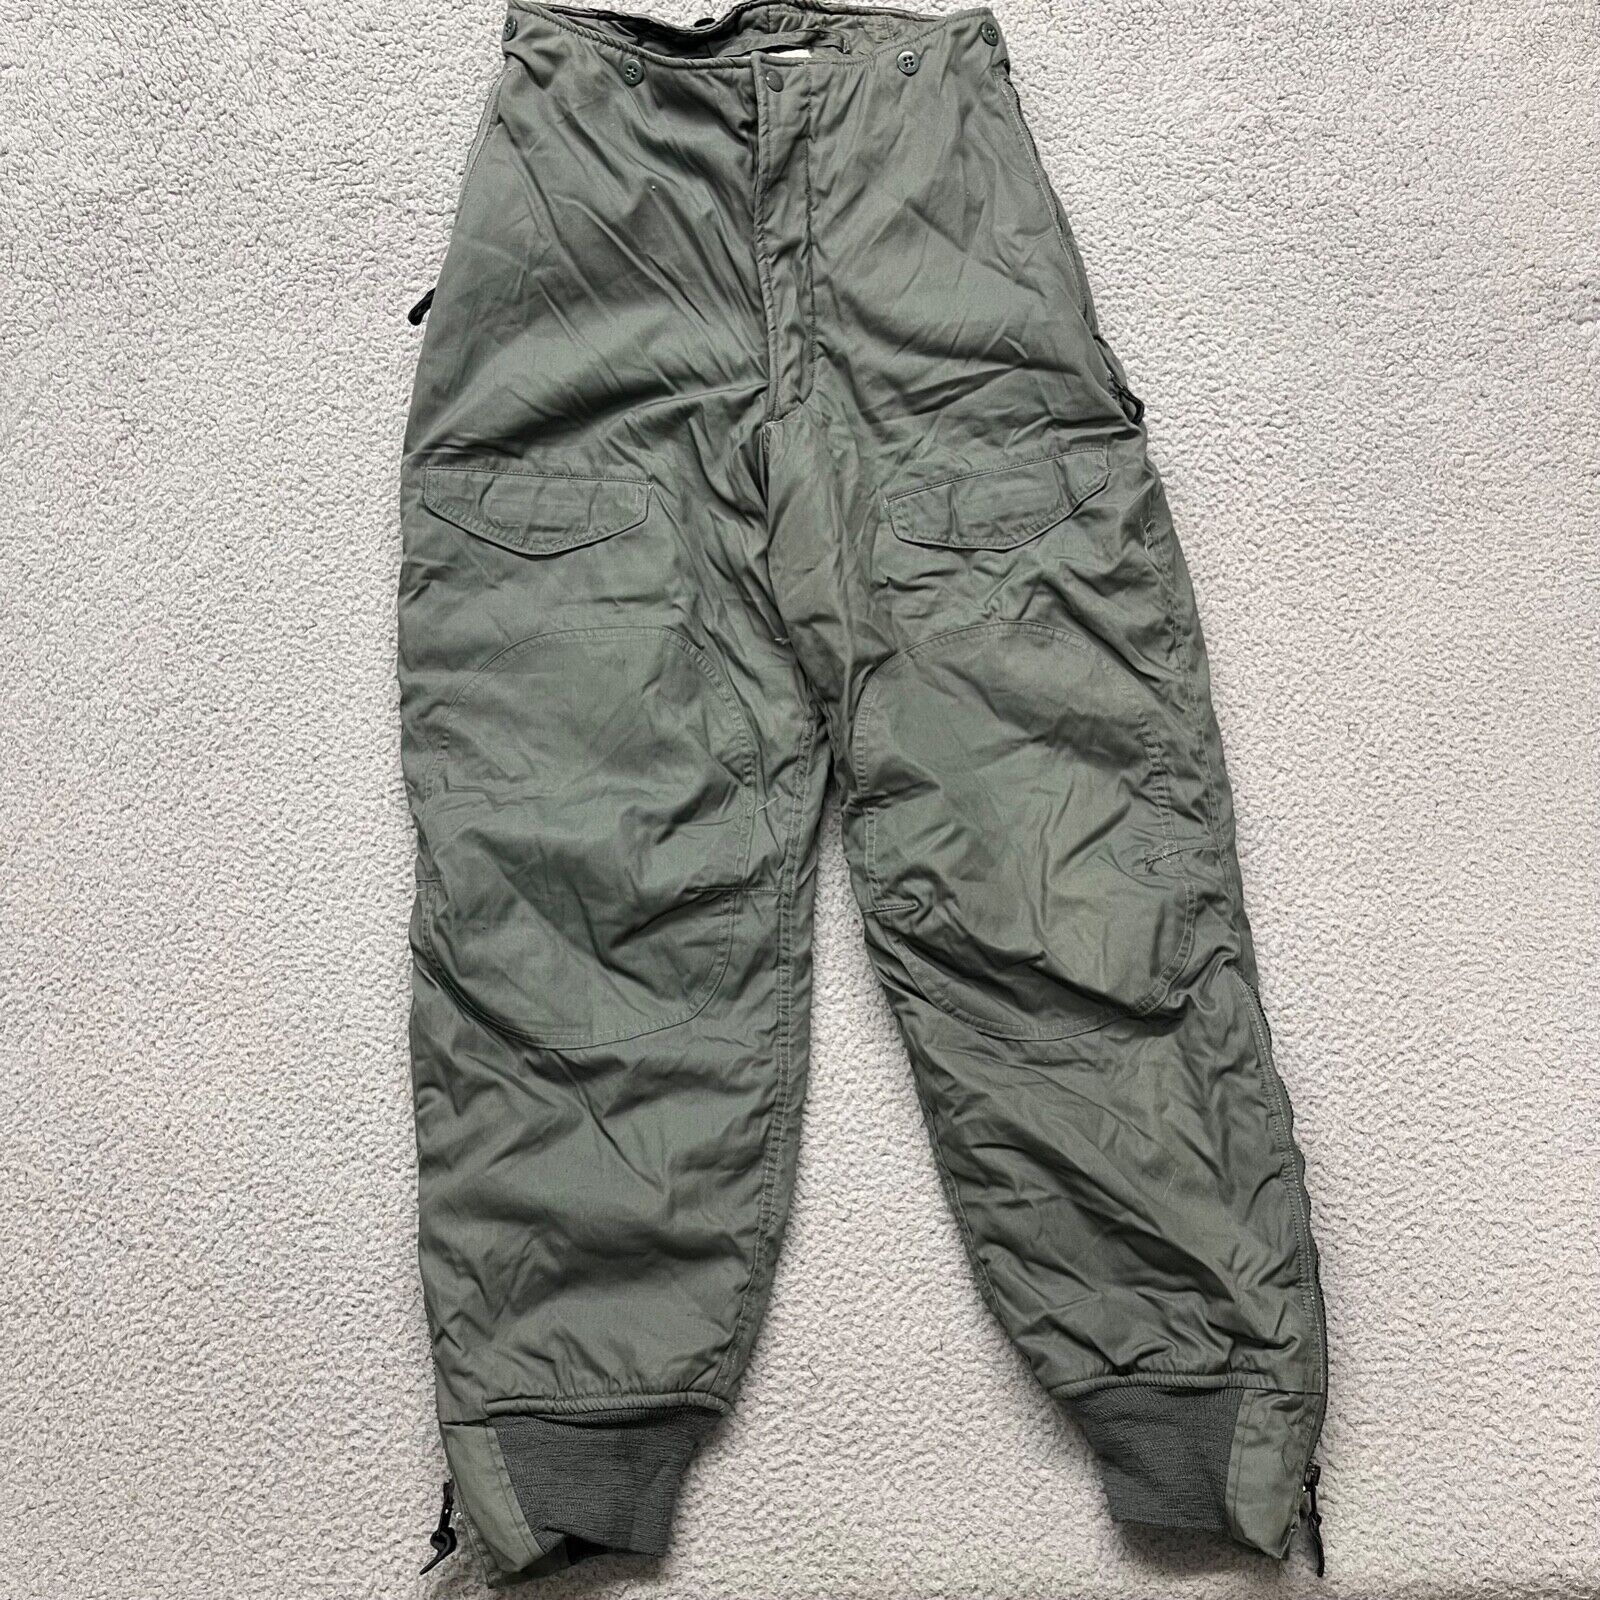 Extreme Cold Weather Trousers Type F1B Size 30 Green US Military Pants Vintage